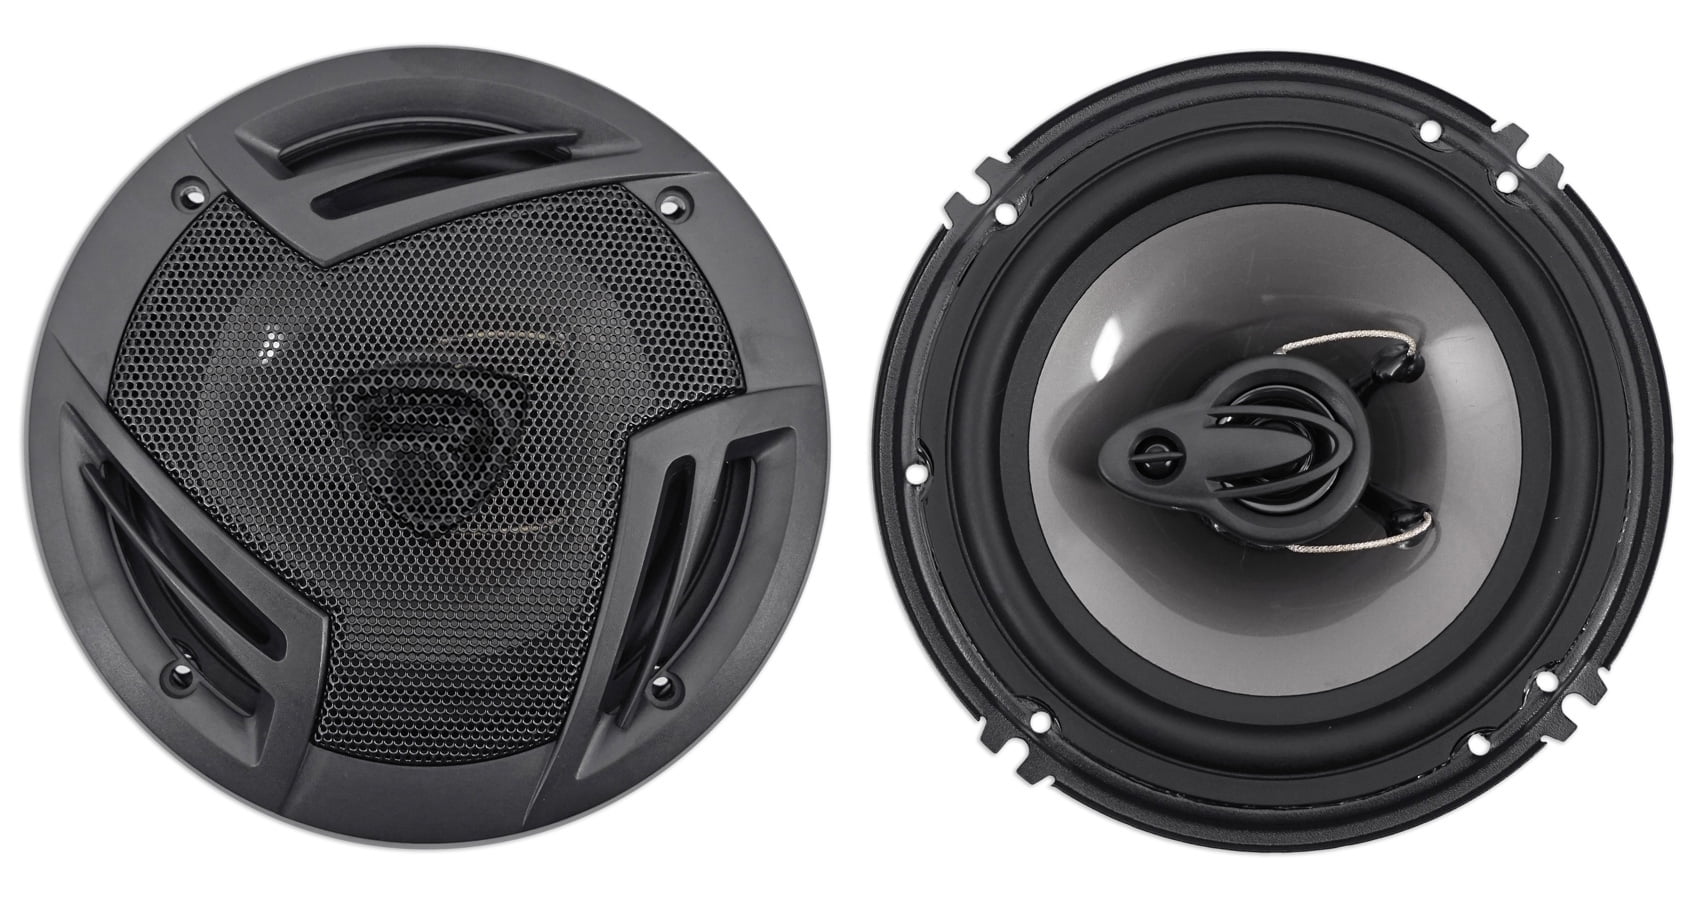 Rockville RV69.4A 6x9" 4-Way Car Speakers 2000 Watts/440w RMS CEA Rated 4 